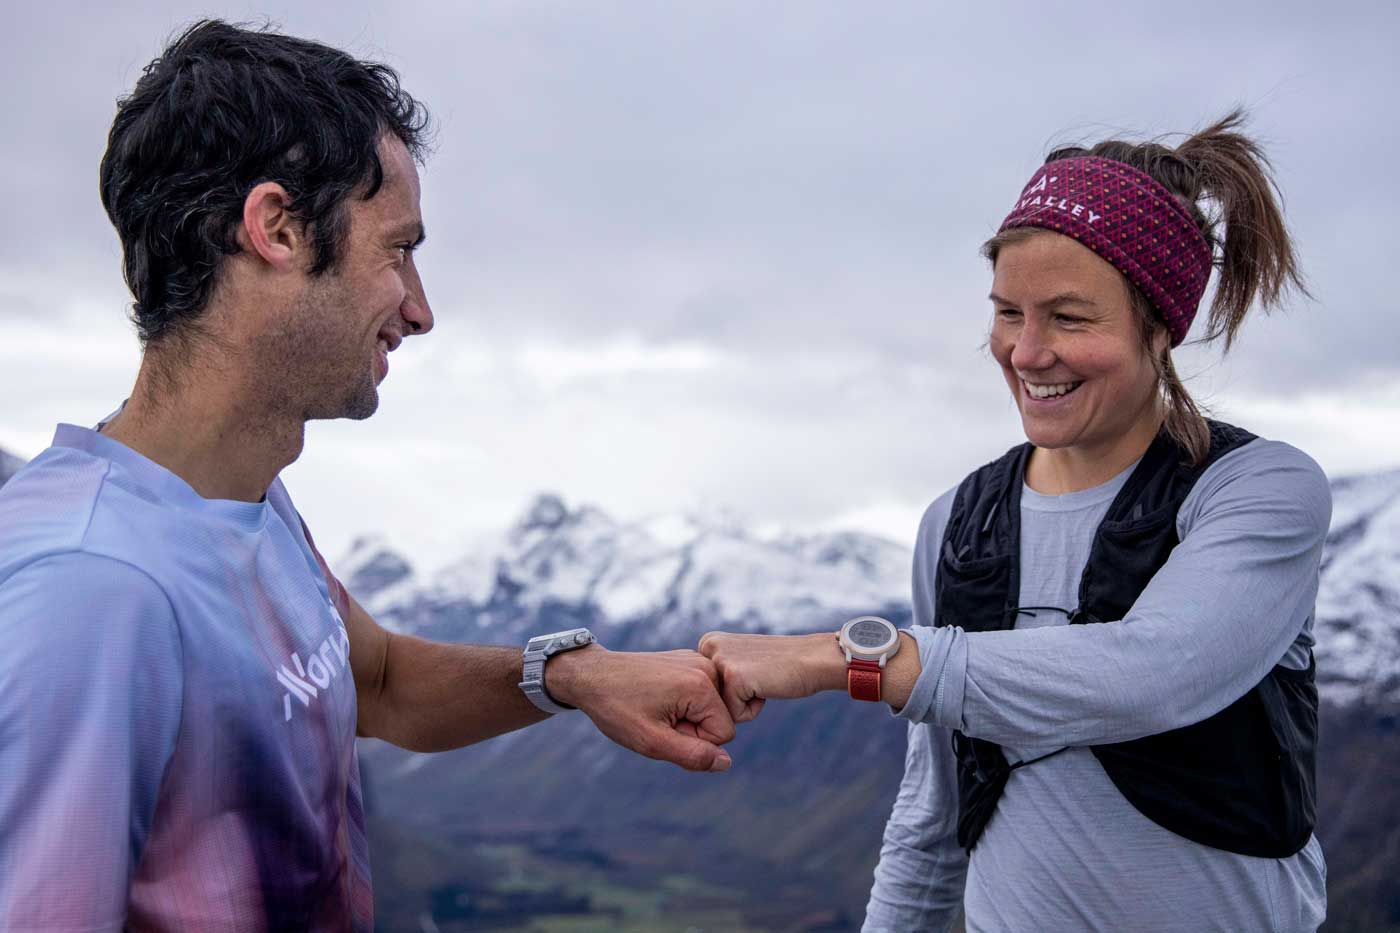 Kilian Jornet and Emelie Forsberg comparing the Coros Apex 2 and Apex 2 Pro GPS watches